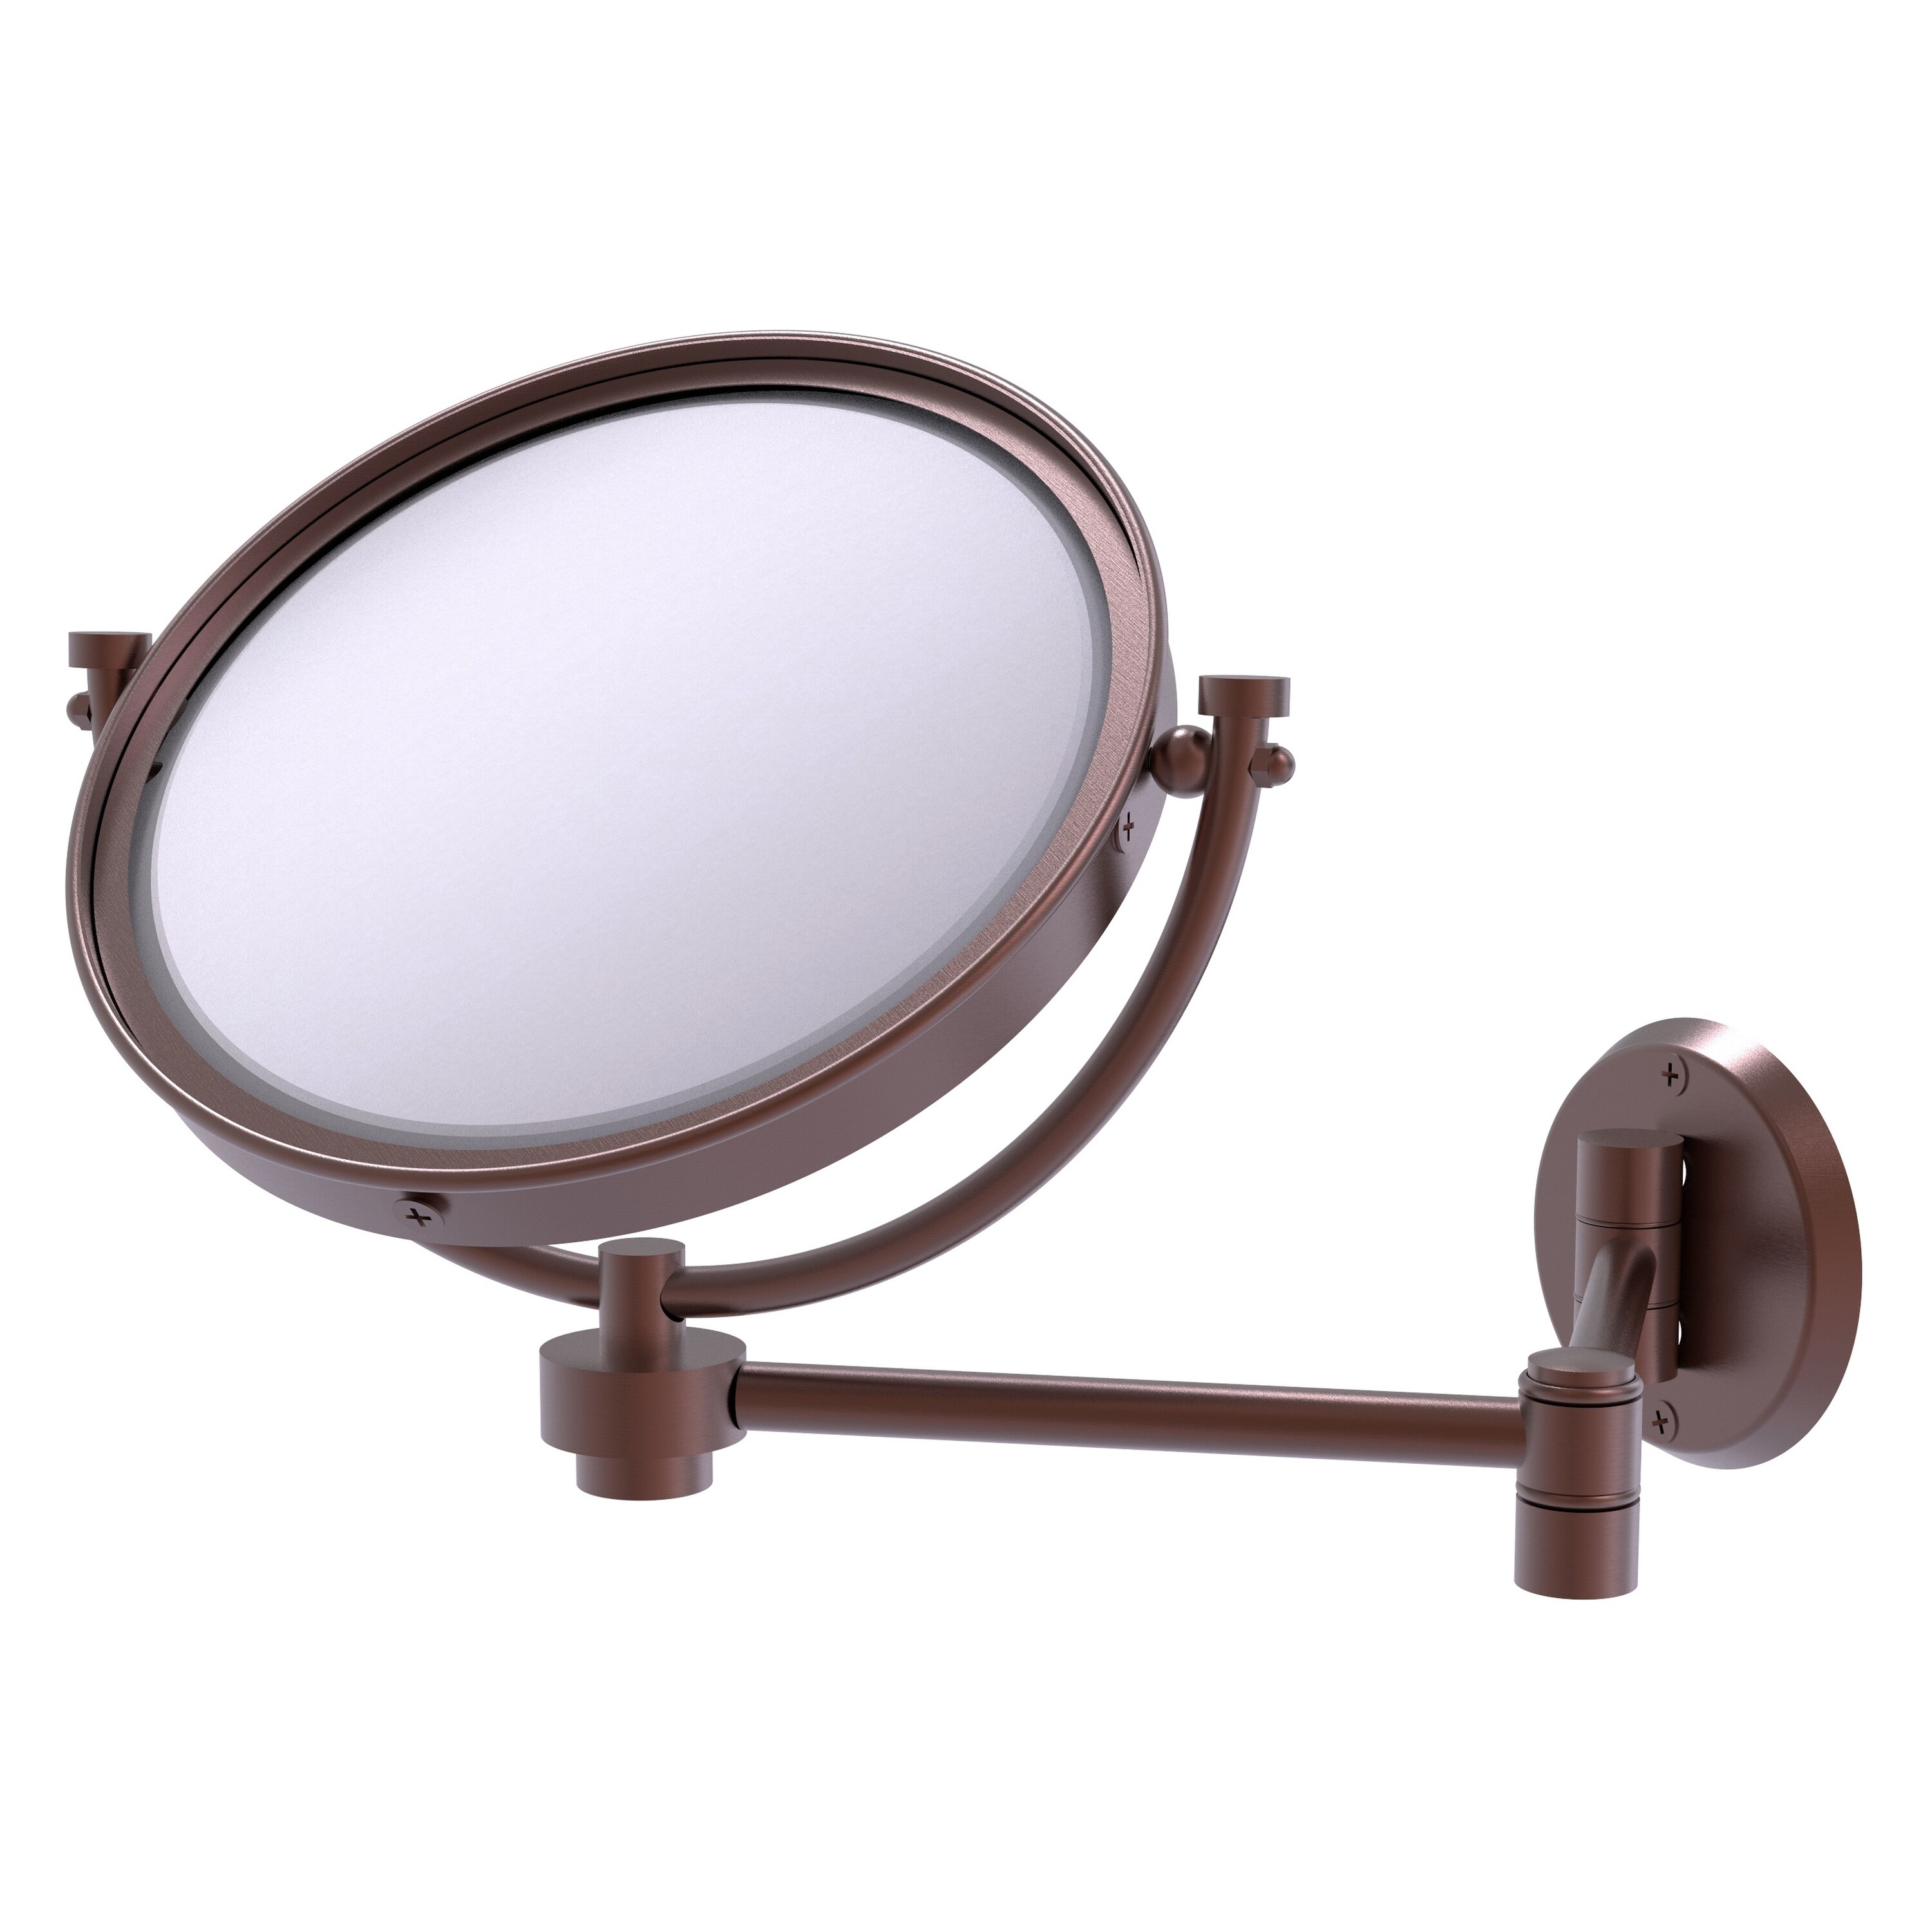 8-in x 10-in Antique Copper Double-sided 3X Magnifying Wall-mounted Vanity Mirror | - Allied Brass WM-6/3X-CA